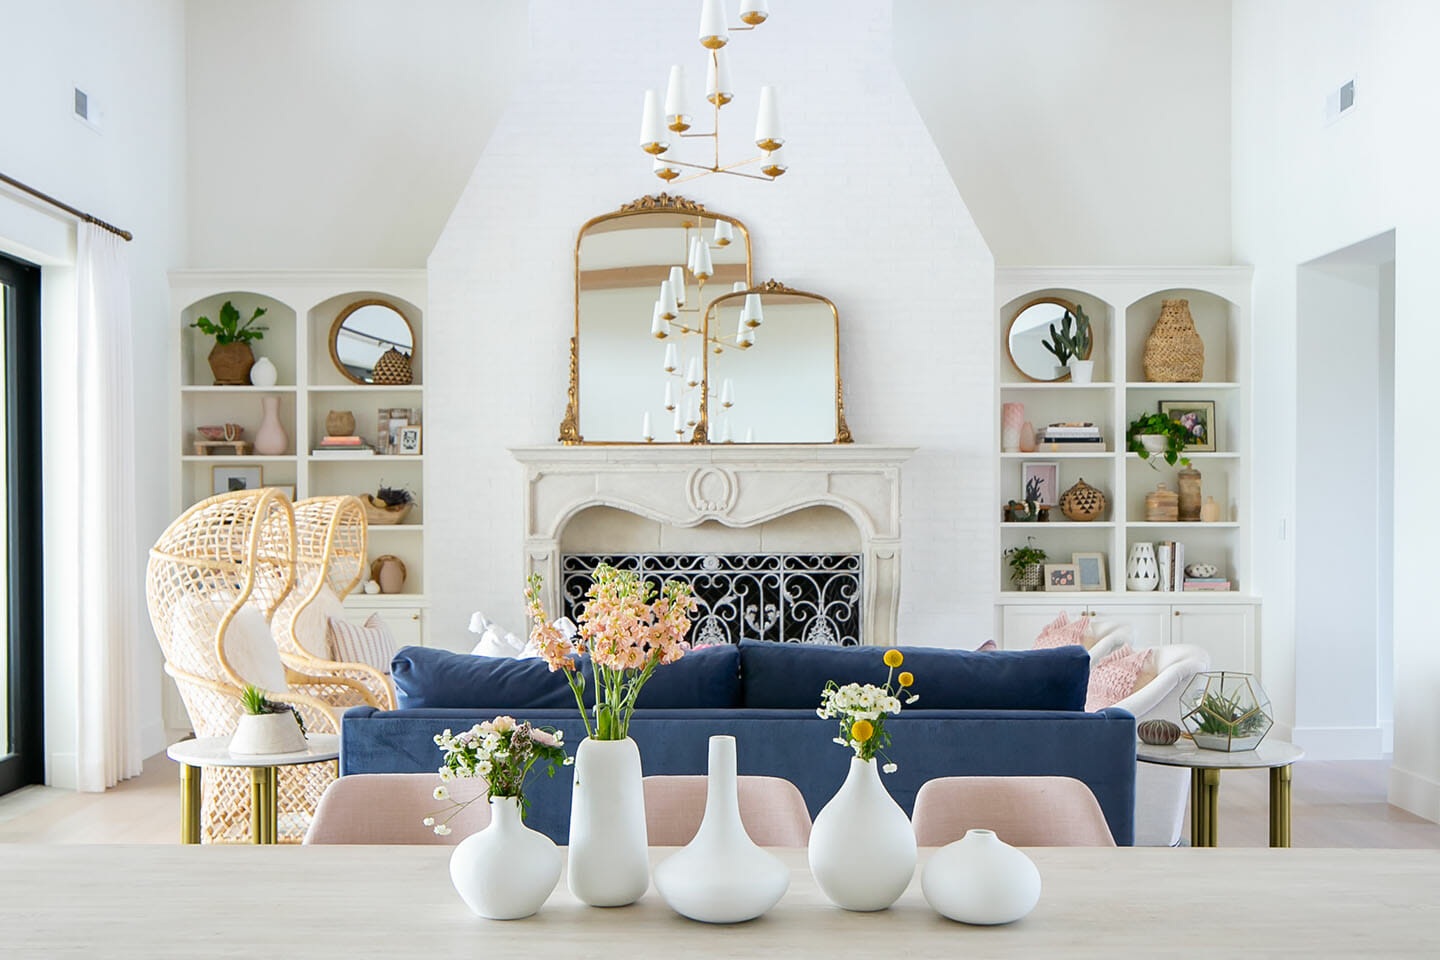 Top 5 Home Decor Trends This Summer in San Diego, CA